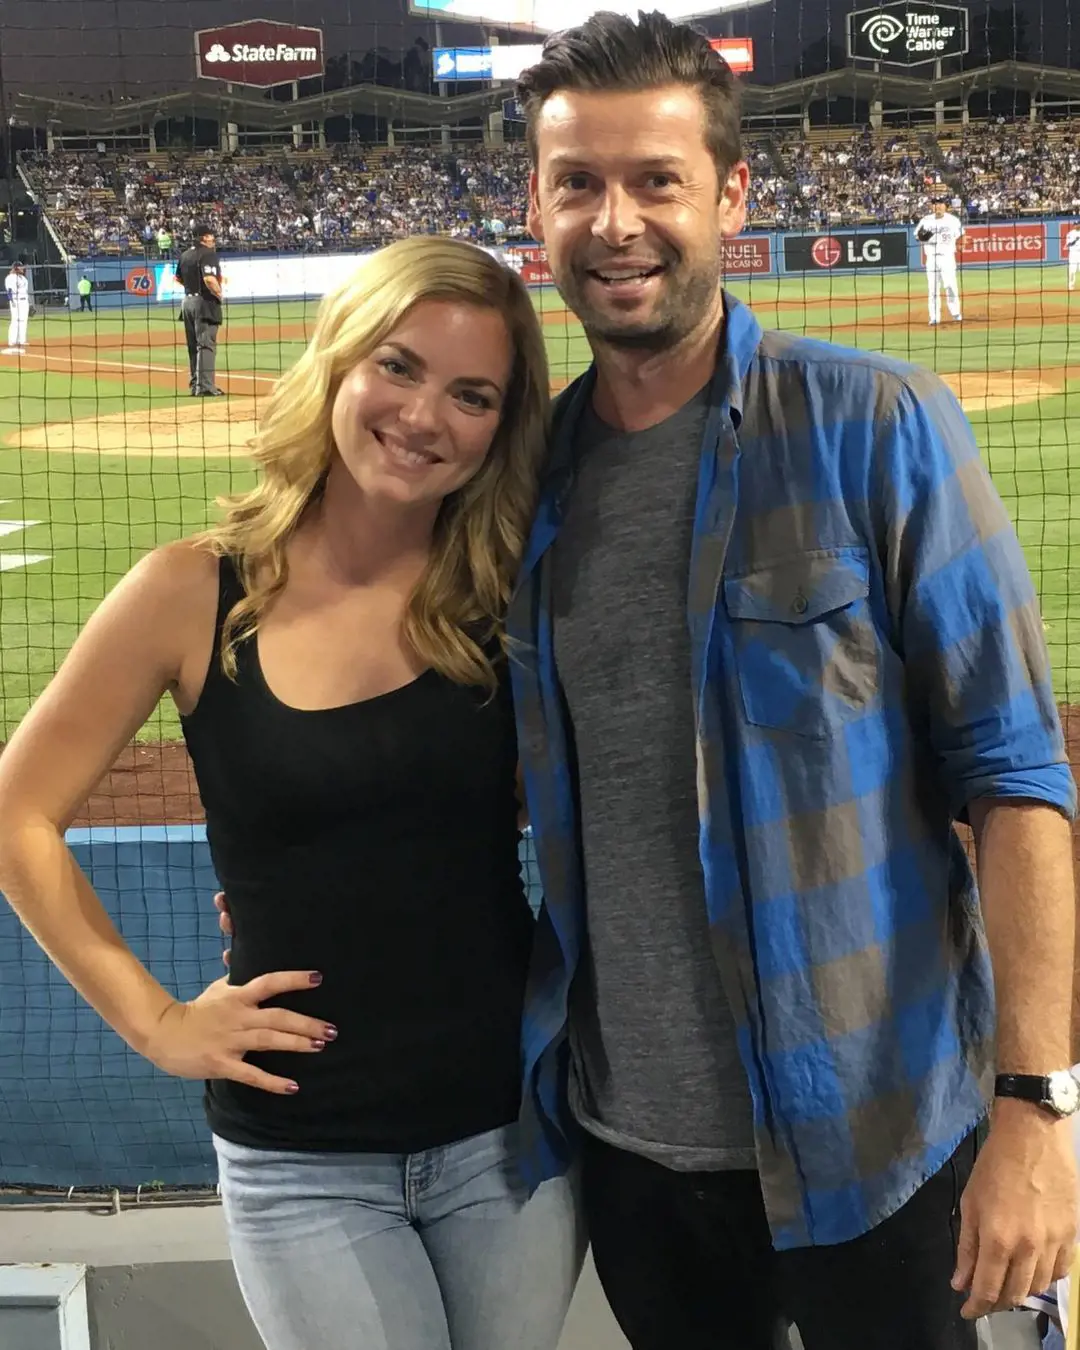 The couple attended Dodger's game in 2021 